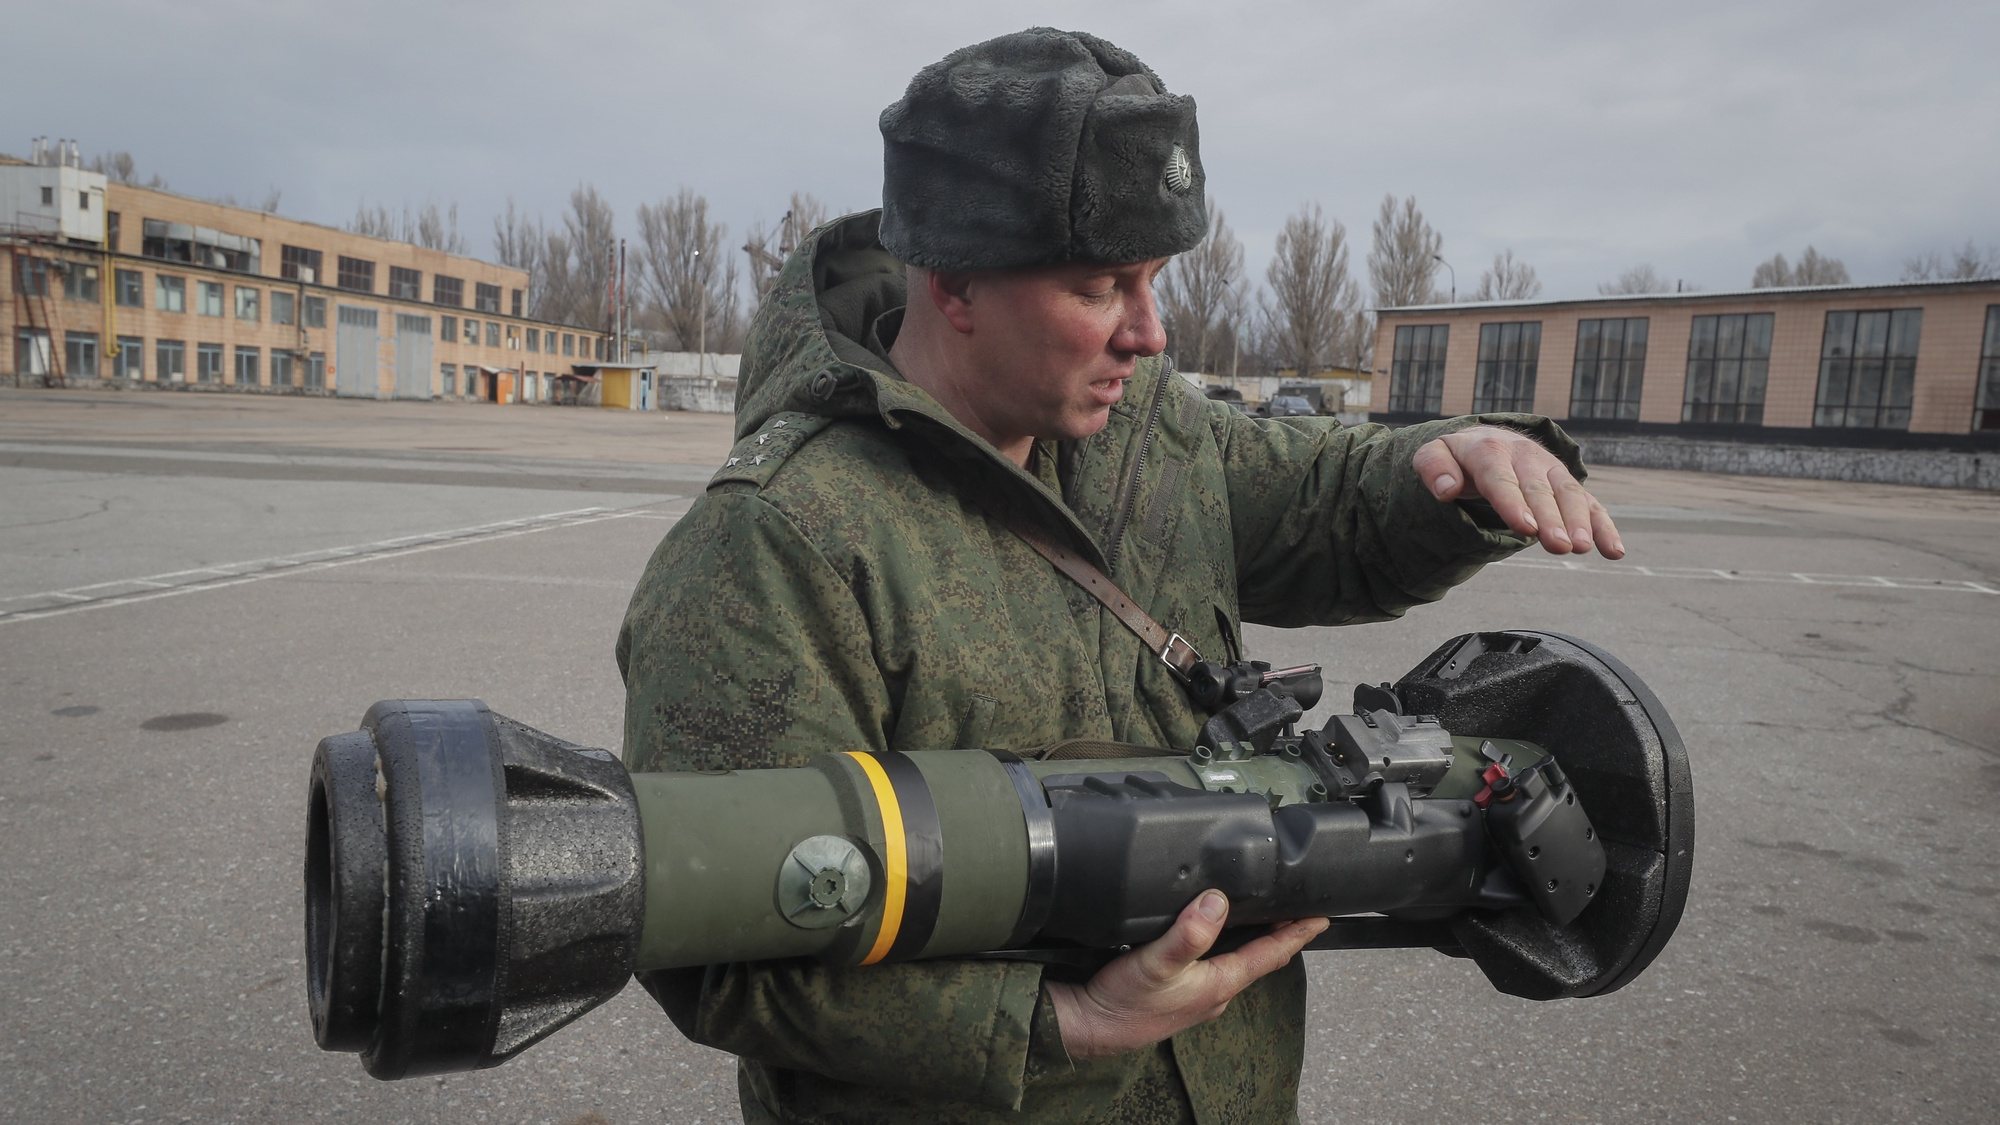 epa09853406 A serviceman of the self-proclaimed Luhansk People&#039;s Republic (LPR) shows NLAW Swidish-UK made Light Anti-tank weapon that was abandoned by Ukrainian army during their retreat in Luhansk region, in Luhansk, Ukraine, 27 March 2022. Over the past two weeks, the US has donated $300 million worth of military aid to Ukrainians. Canada and the UK have said they will continue to supply arms to Ukraine. On 24 February Russian troops had entered Ukrainian territory in what the Russian president declared a &#039;special military operation&#039;, resulting in fighting and destruction in the country, a huge flow of refugees, and multiple sanctions against Russia.  EPA/SERGEI ILNITSKY